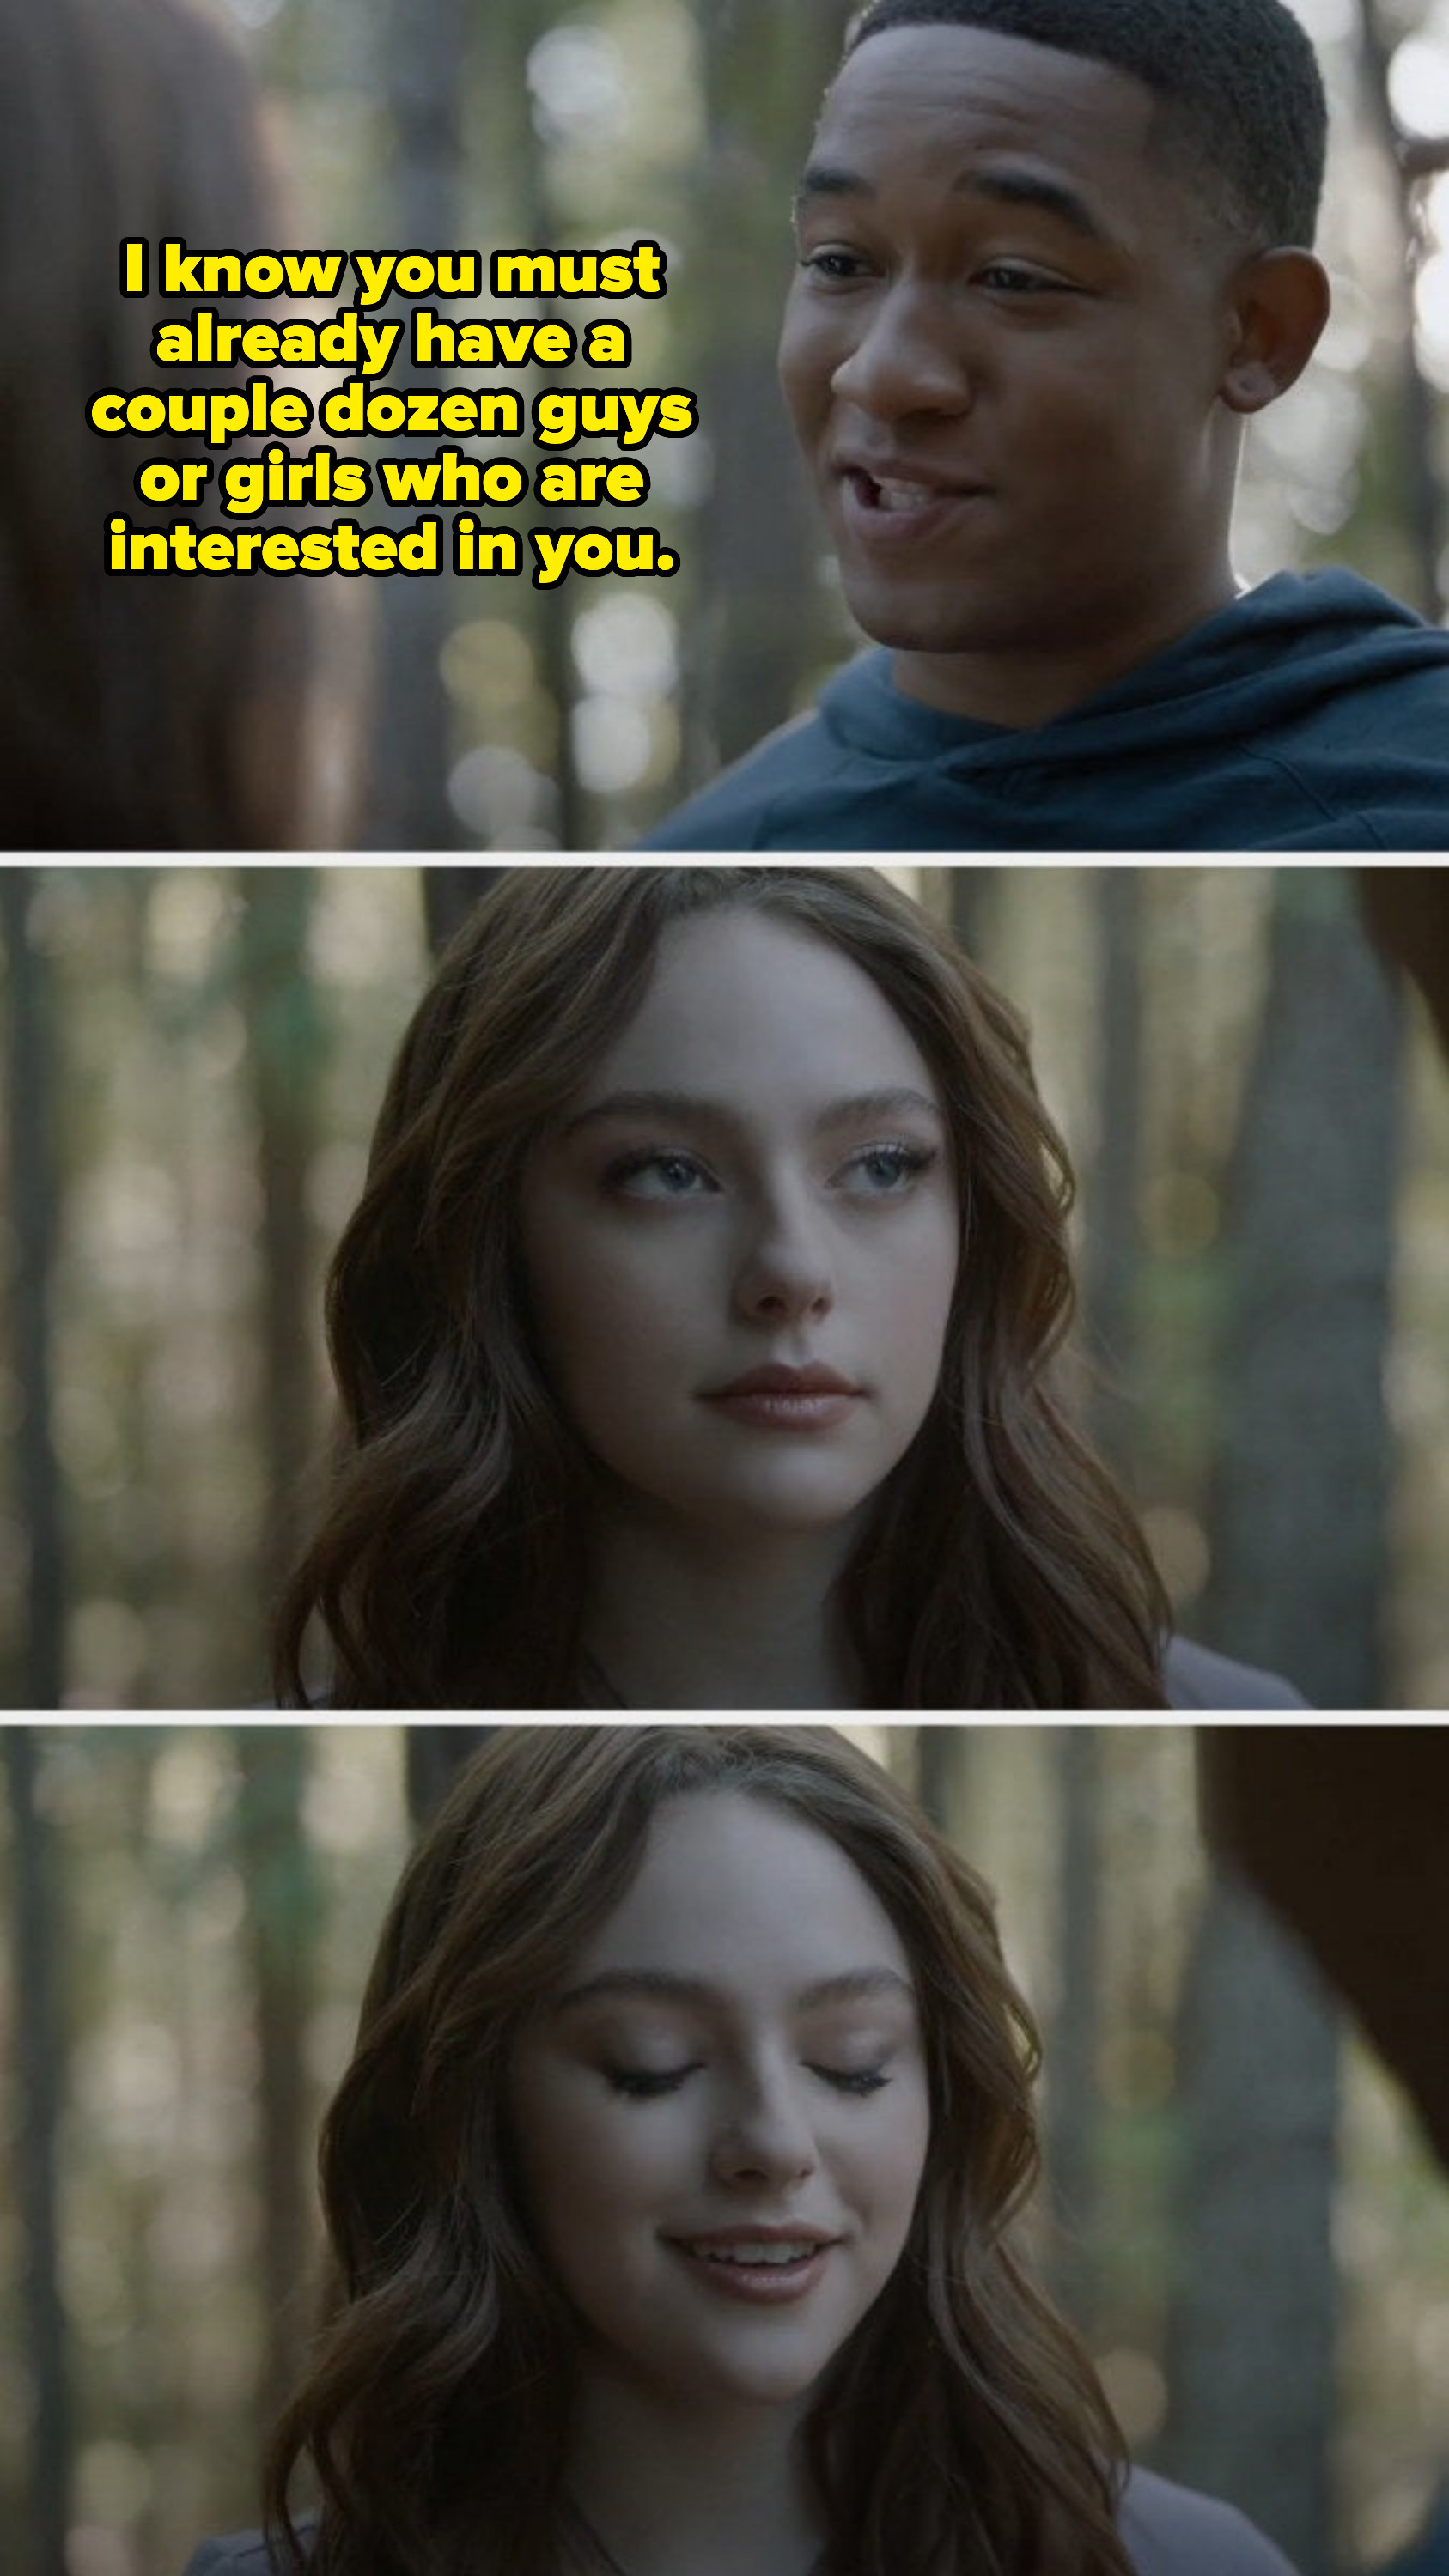 Hope from &quot;Legacies&quot; with caption, &quot;I know you must already have a couple dozen guys or girls that are interested in you&quot;